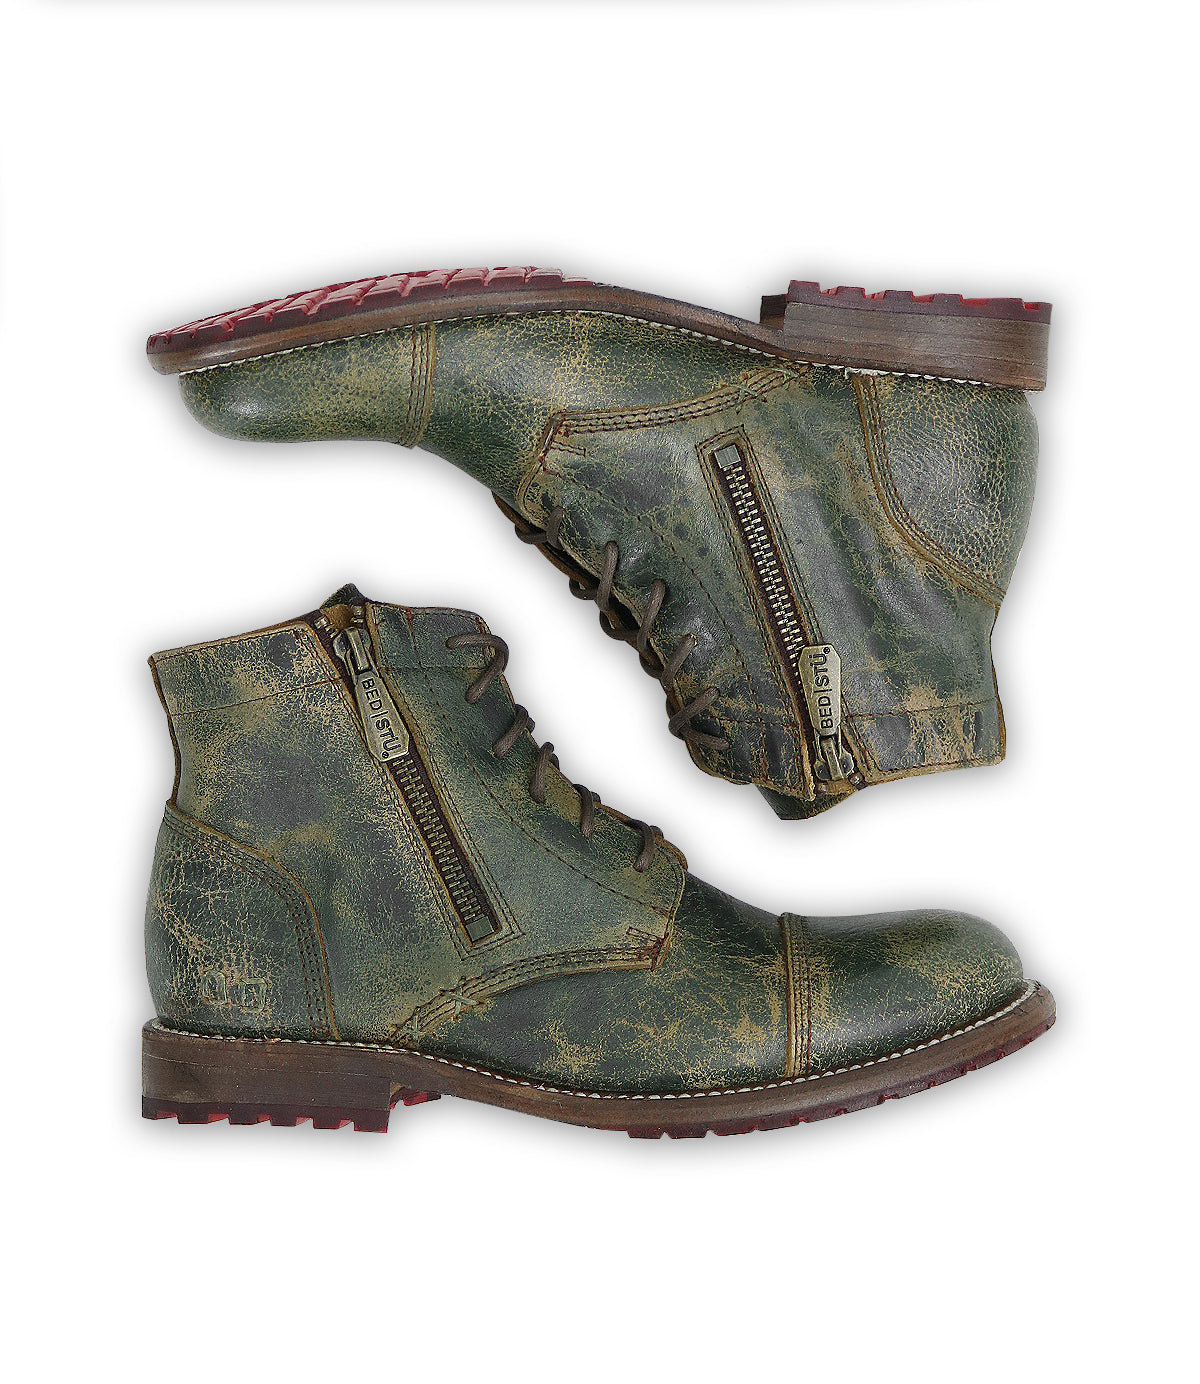 A pair of Bonnie II teal leather boots by Bed Stu.